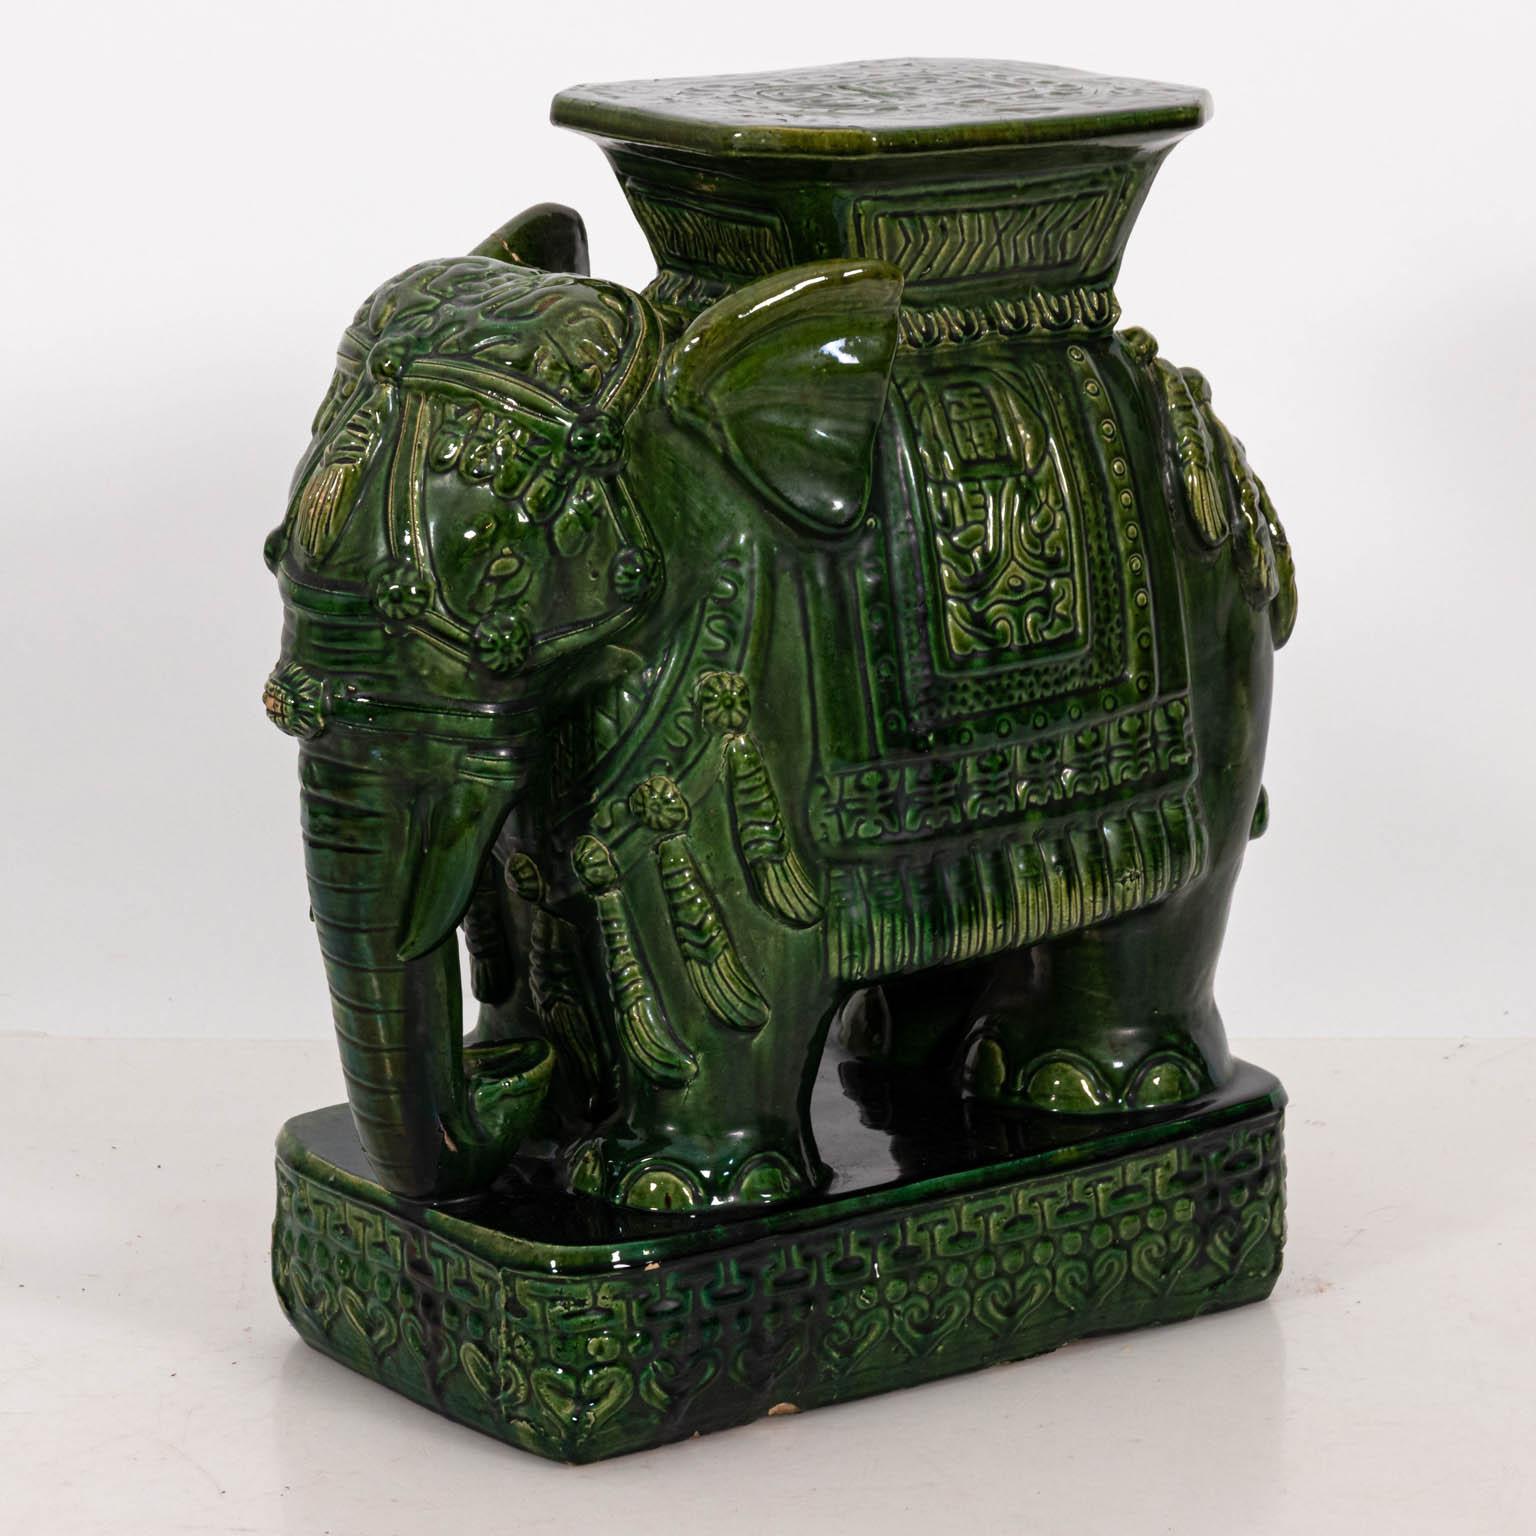 Painted Pair of Large Green Glazed Terracotta Elephant Garden Seats